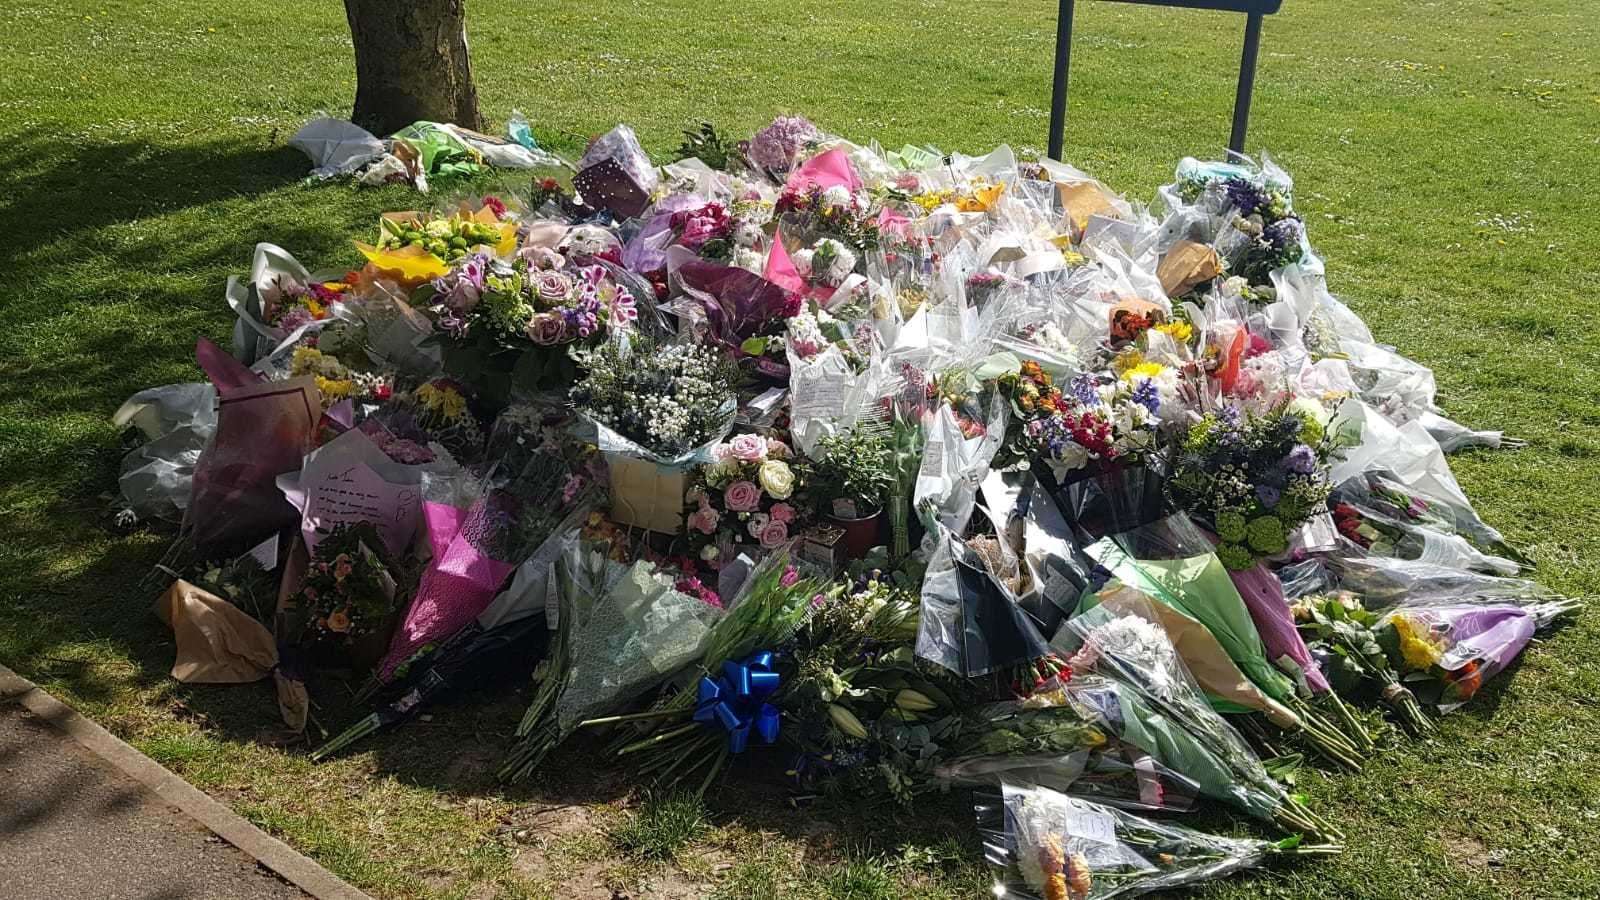 Dozens of floral tributes were left in Aylesham's Market Square following Julia's death in April